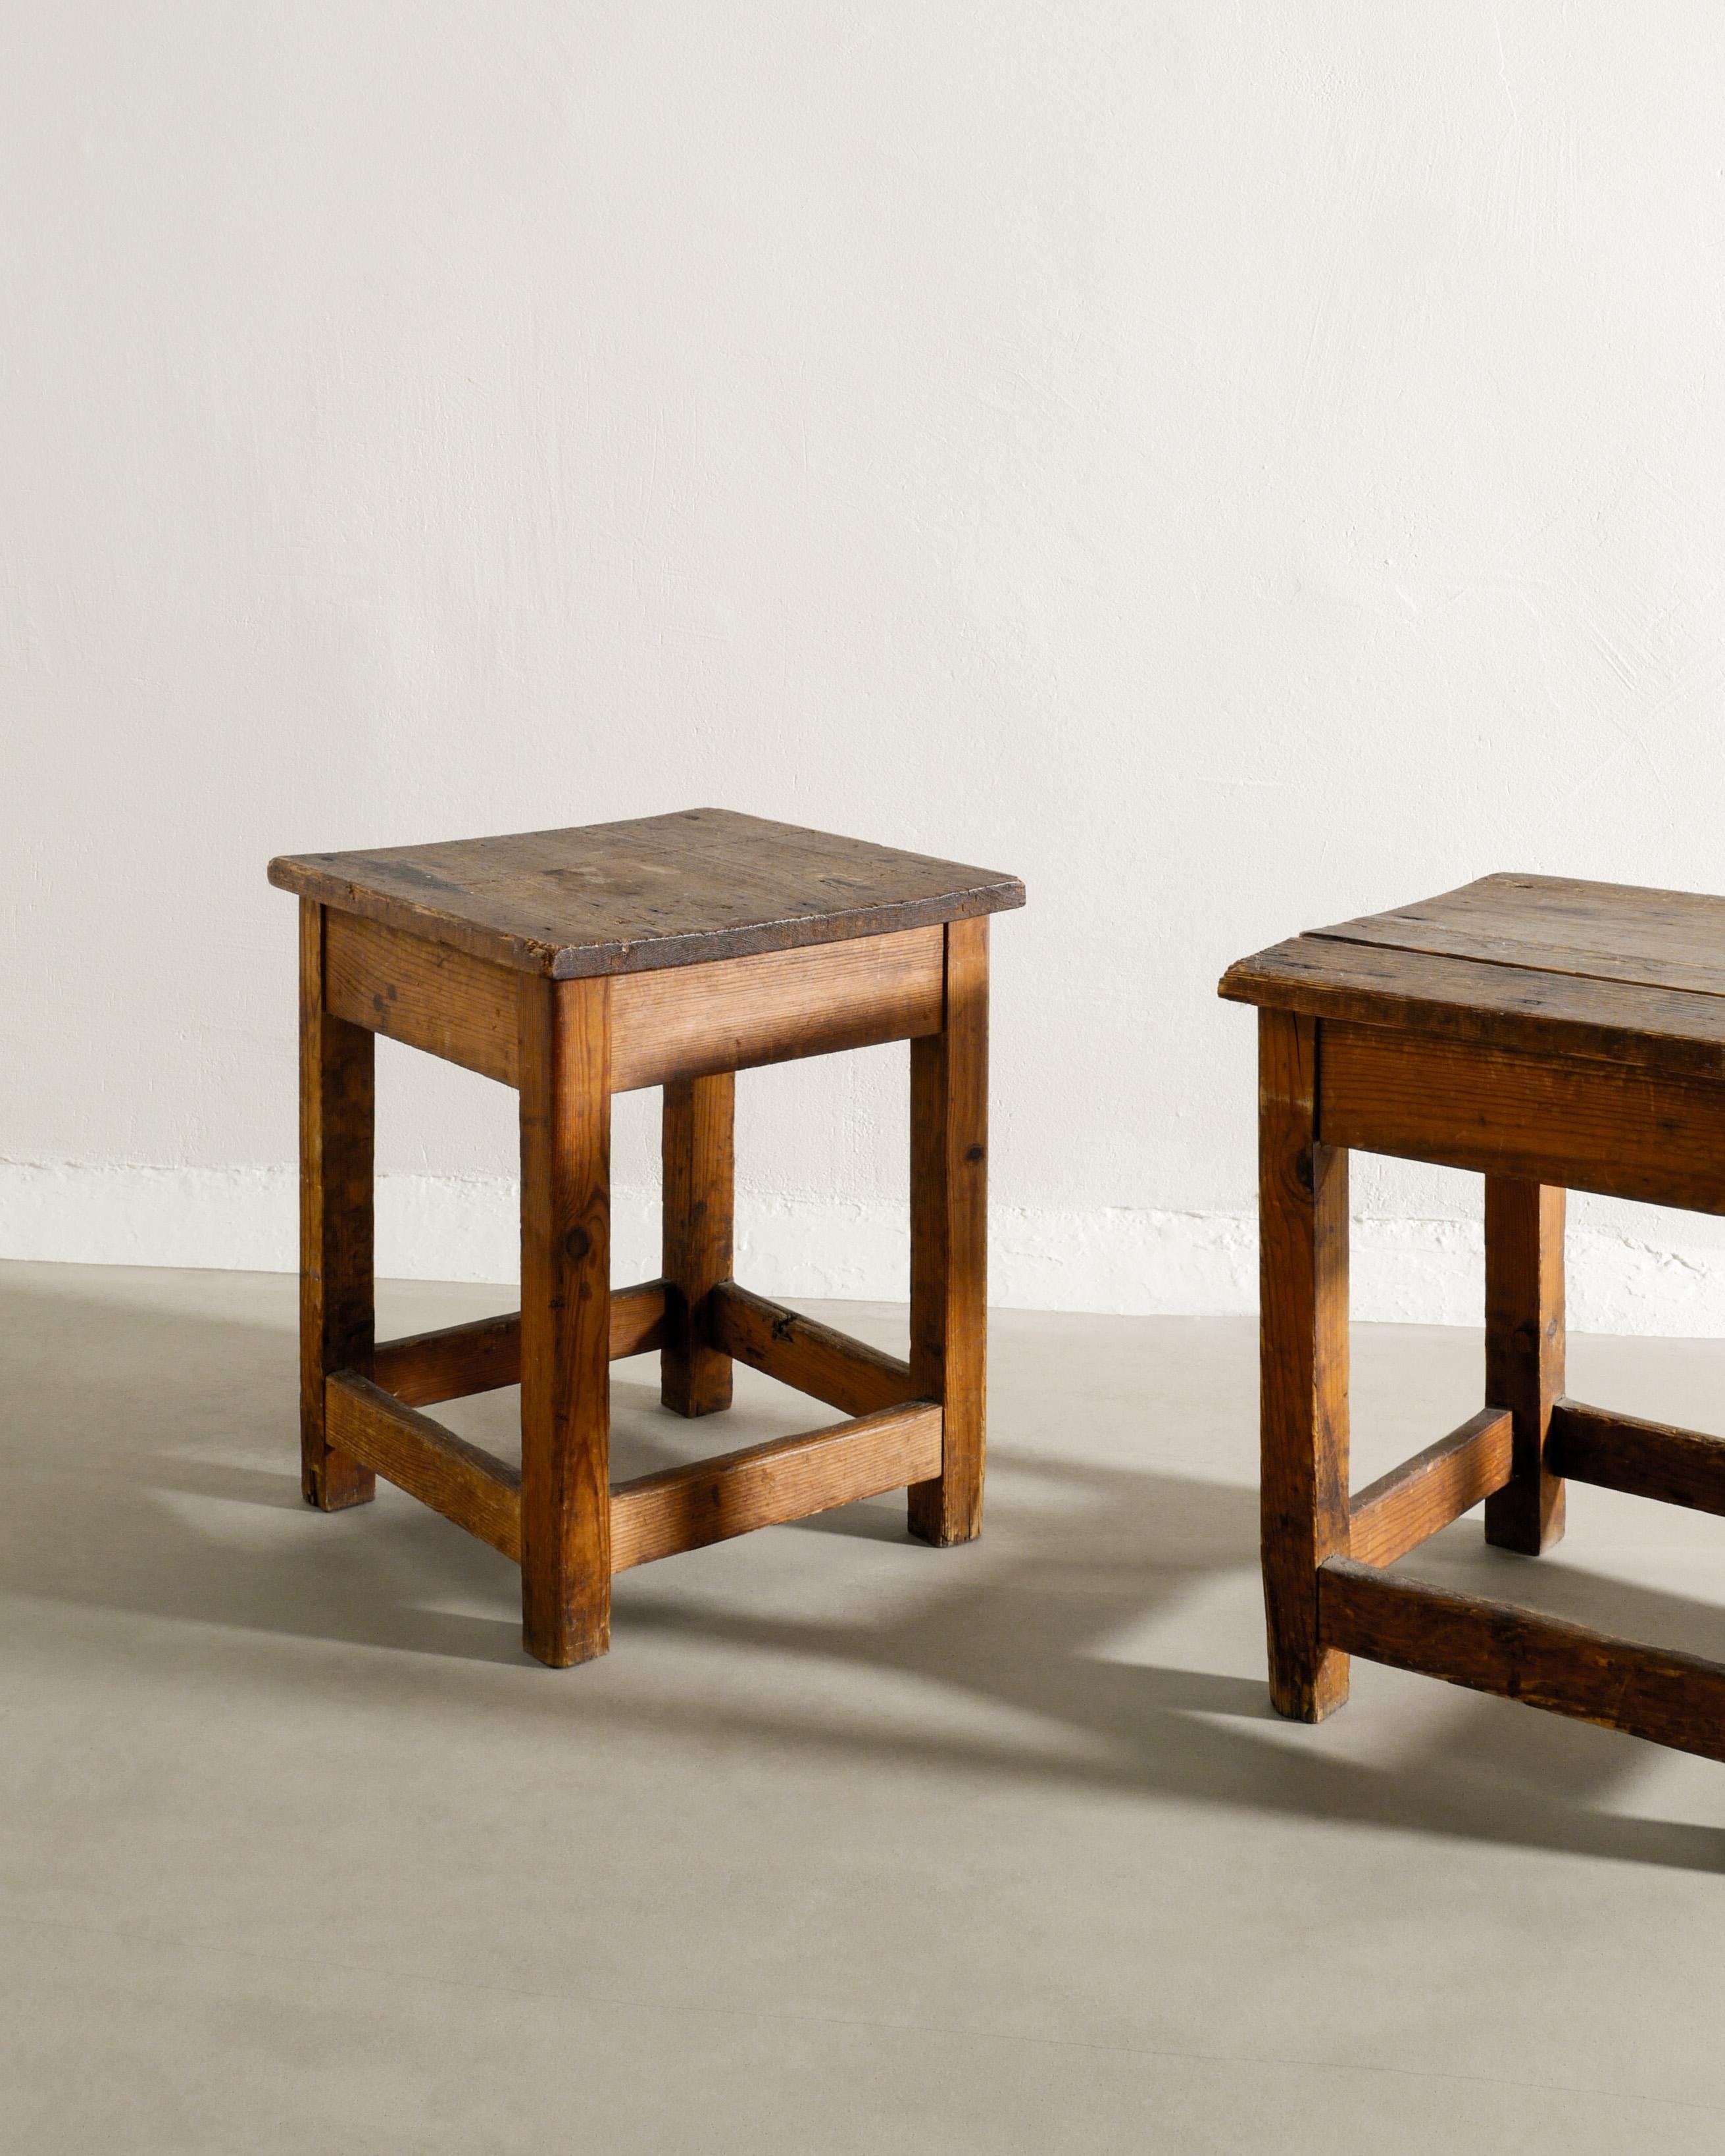 Pair of Rustic Wooden Swedish Bed Side Tables in Pine Produced Early, 1900s For Sale 1